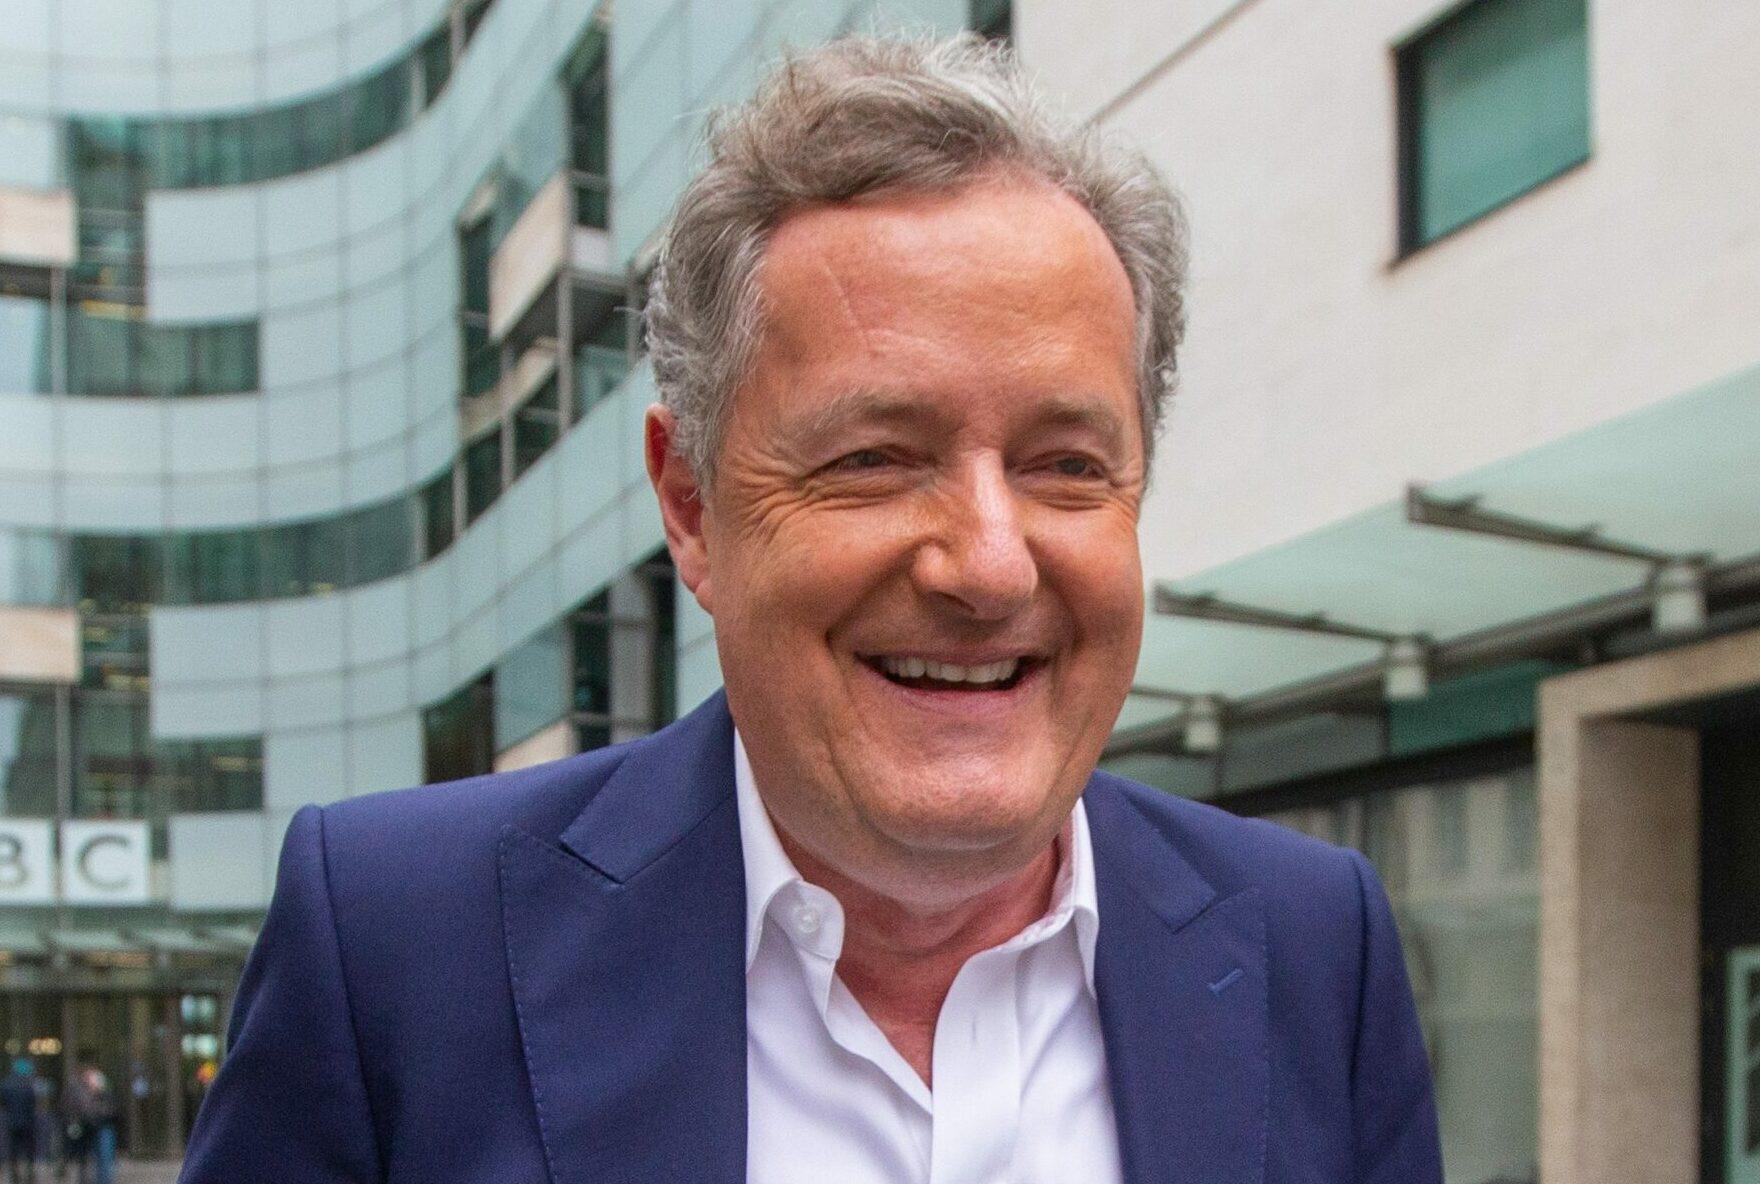 Piers Morgan leaving BBC after appearing on the show Sunday Morning.